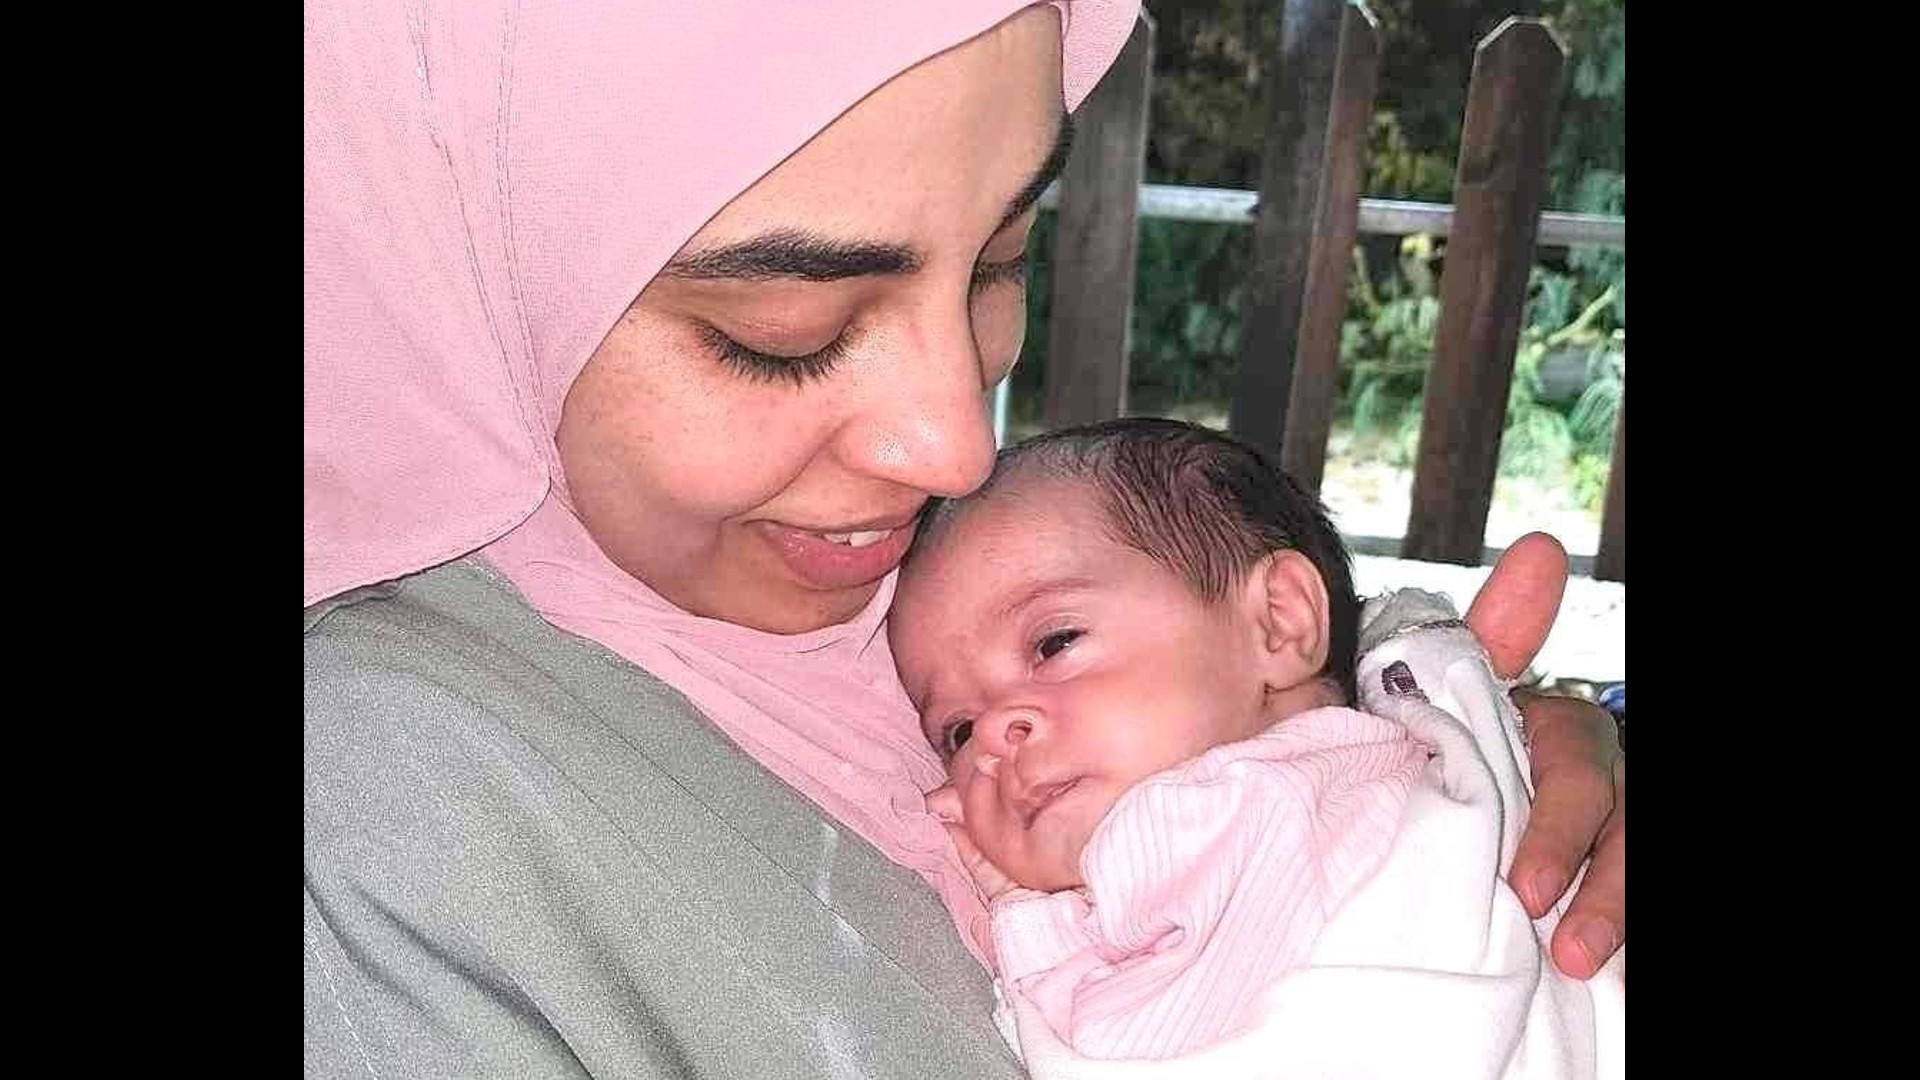 Palestinian journalist Rula Hassanein, 29, who was detained by Israeli forces on 19 March, with her baby daughter Elia (Supplied)